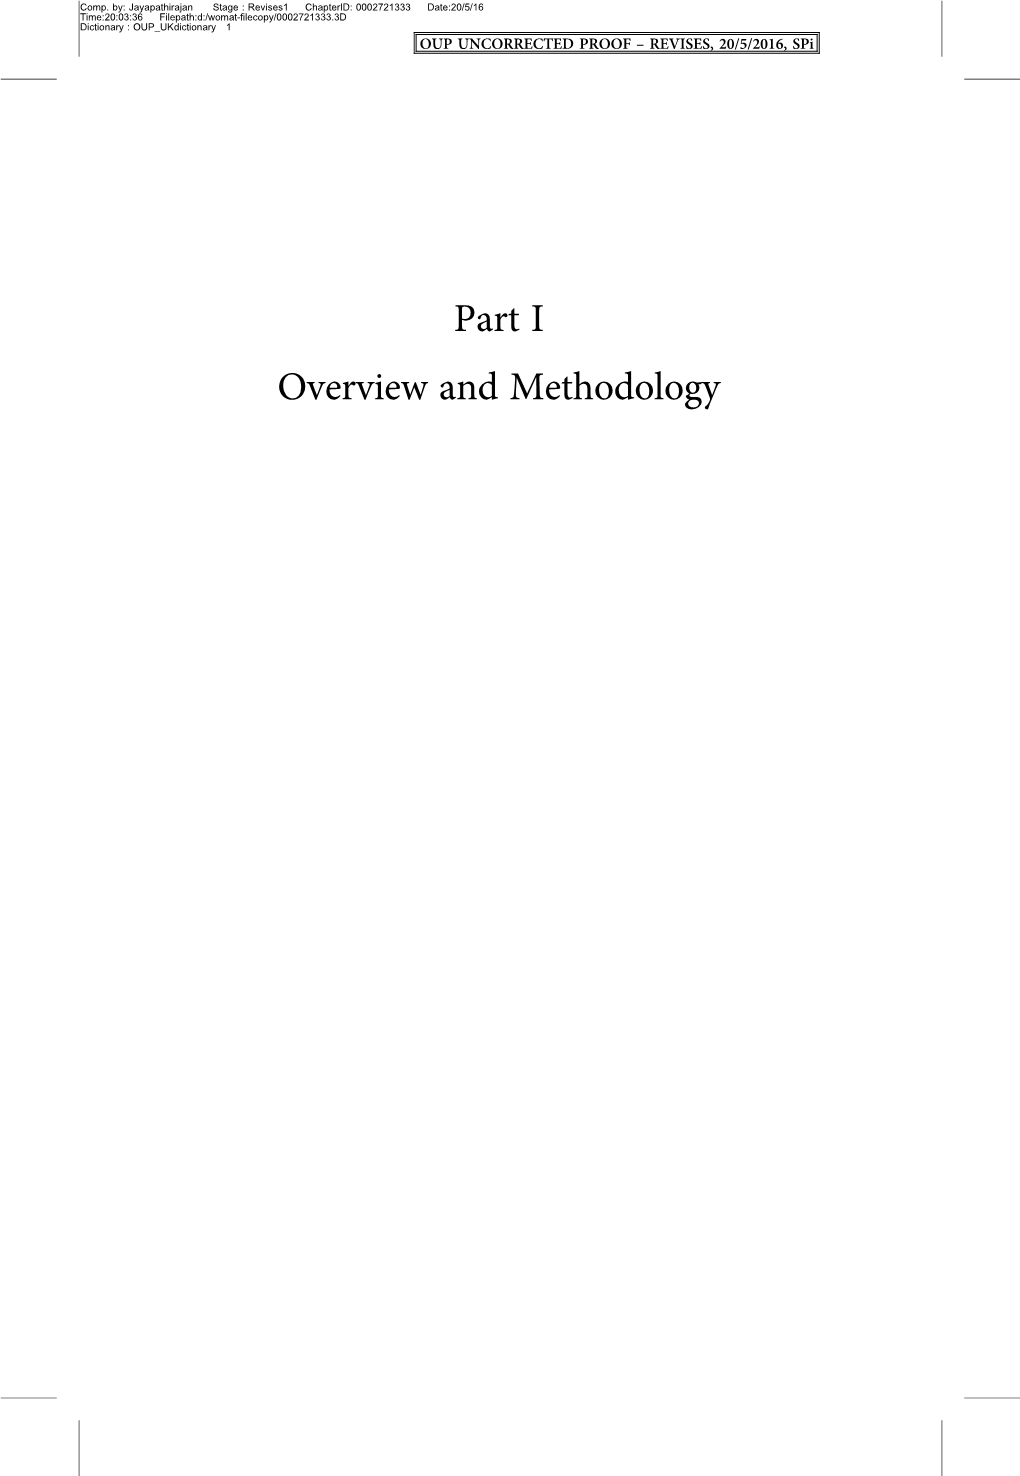 Part I Overview and Methodology Comp